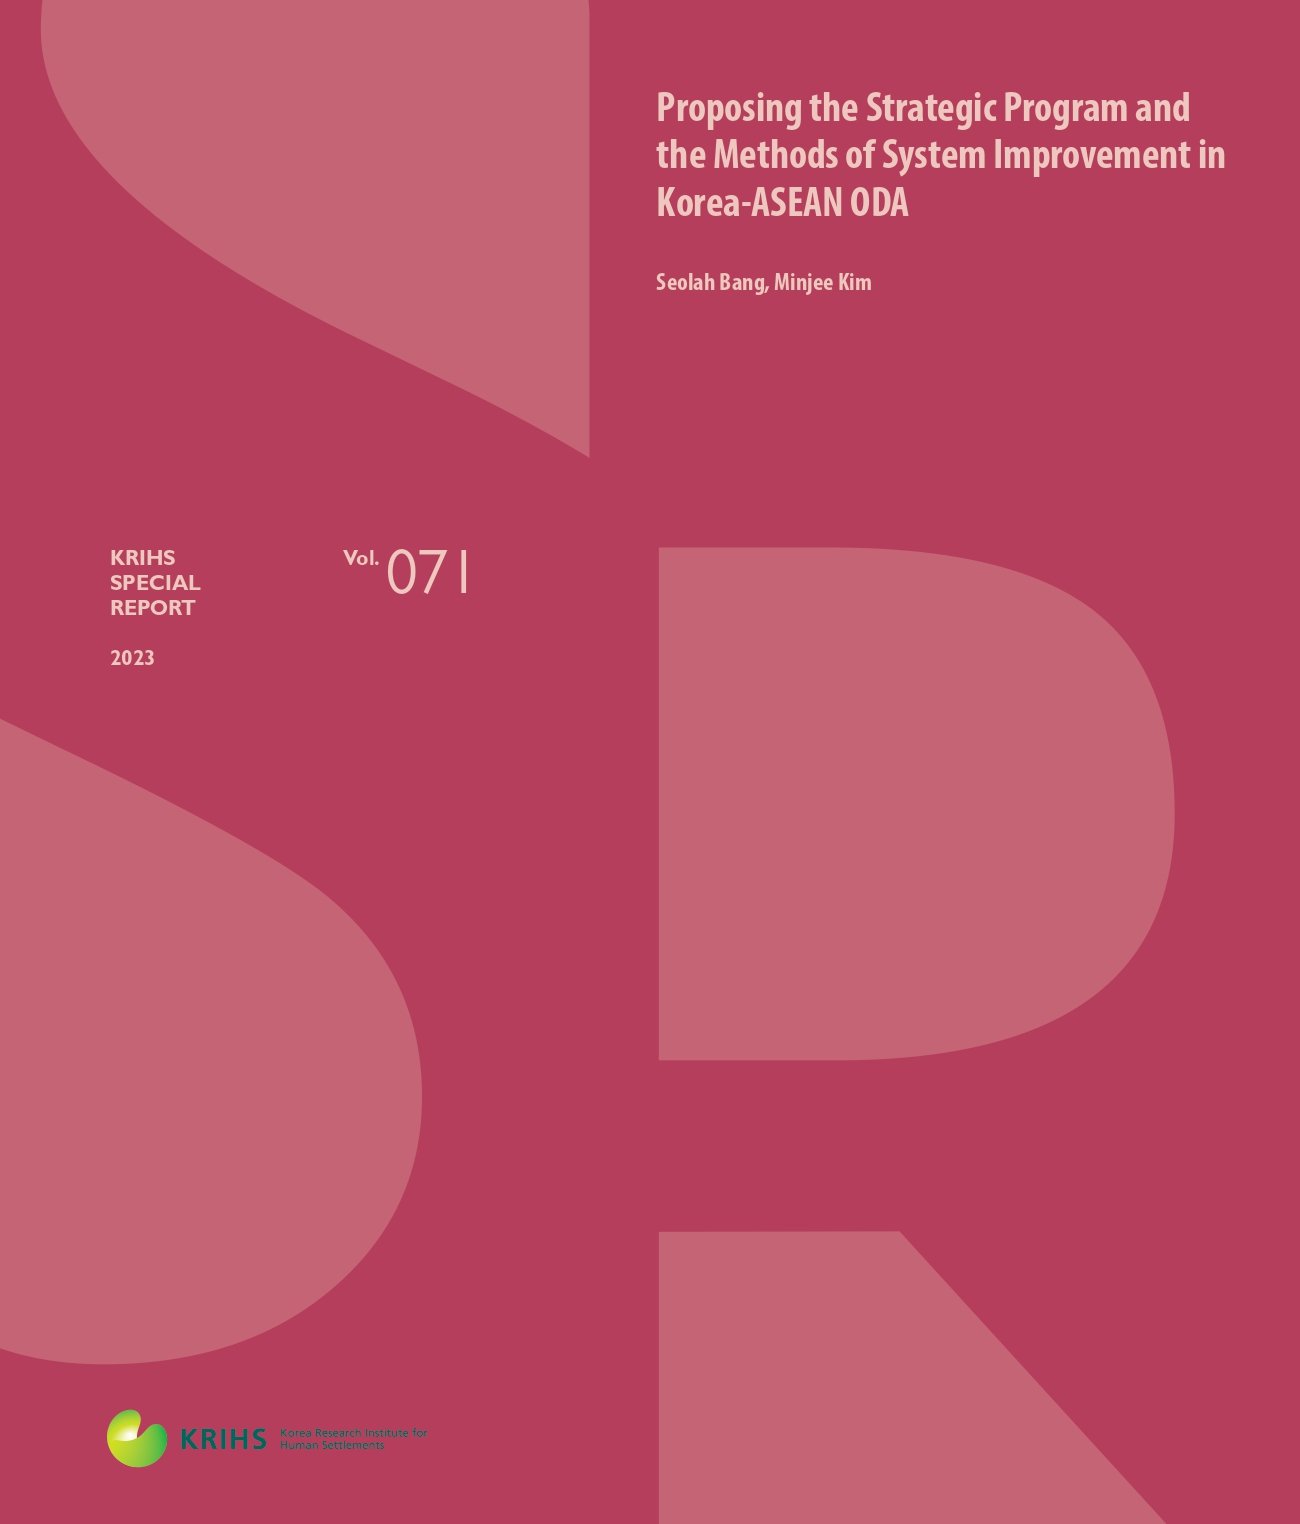 Special Report Vol. 71 (2023)

Proposing the Strategic Program and the Methods of System Improvement in Korea-ASEAN ODA